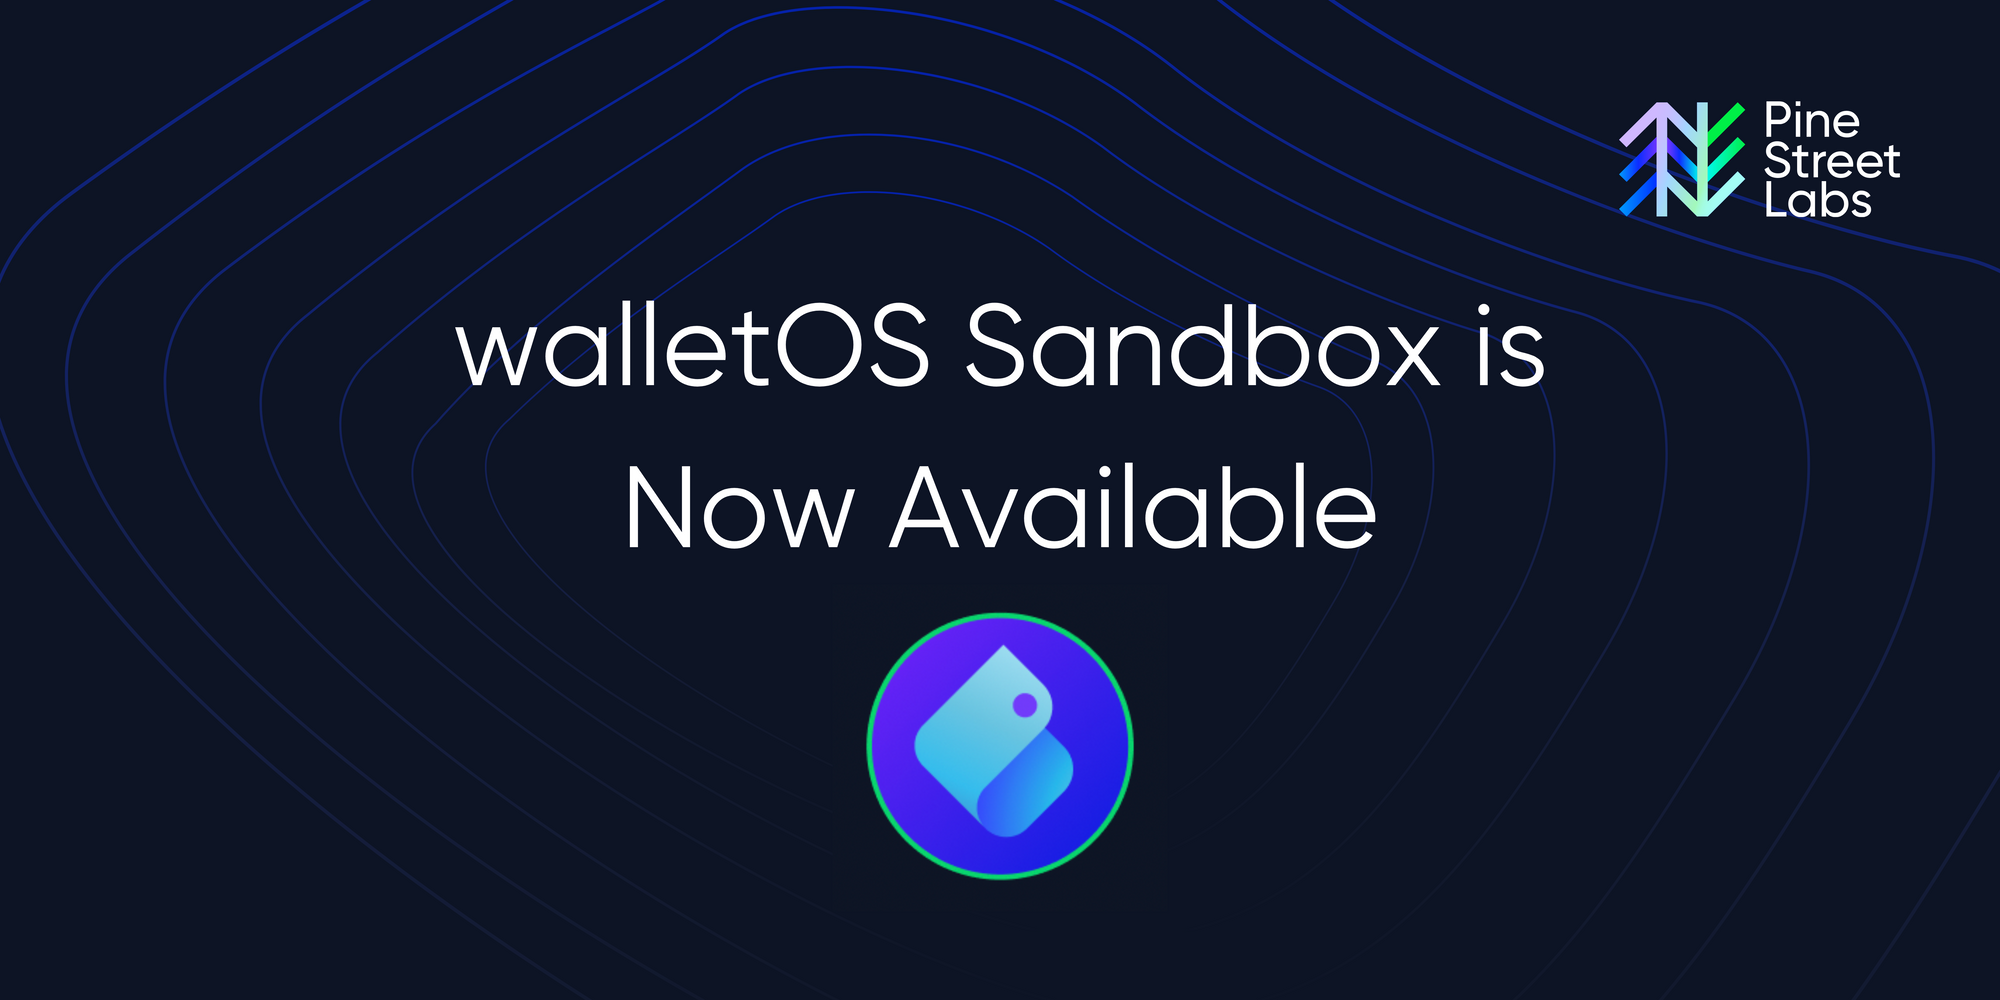 walletOS Sandbox is Now Available